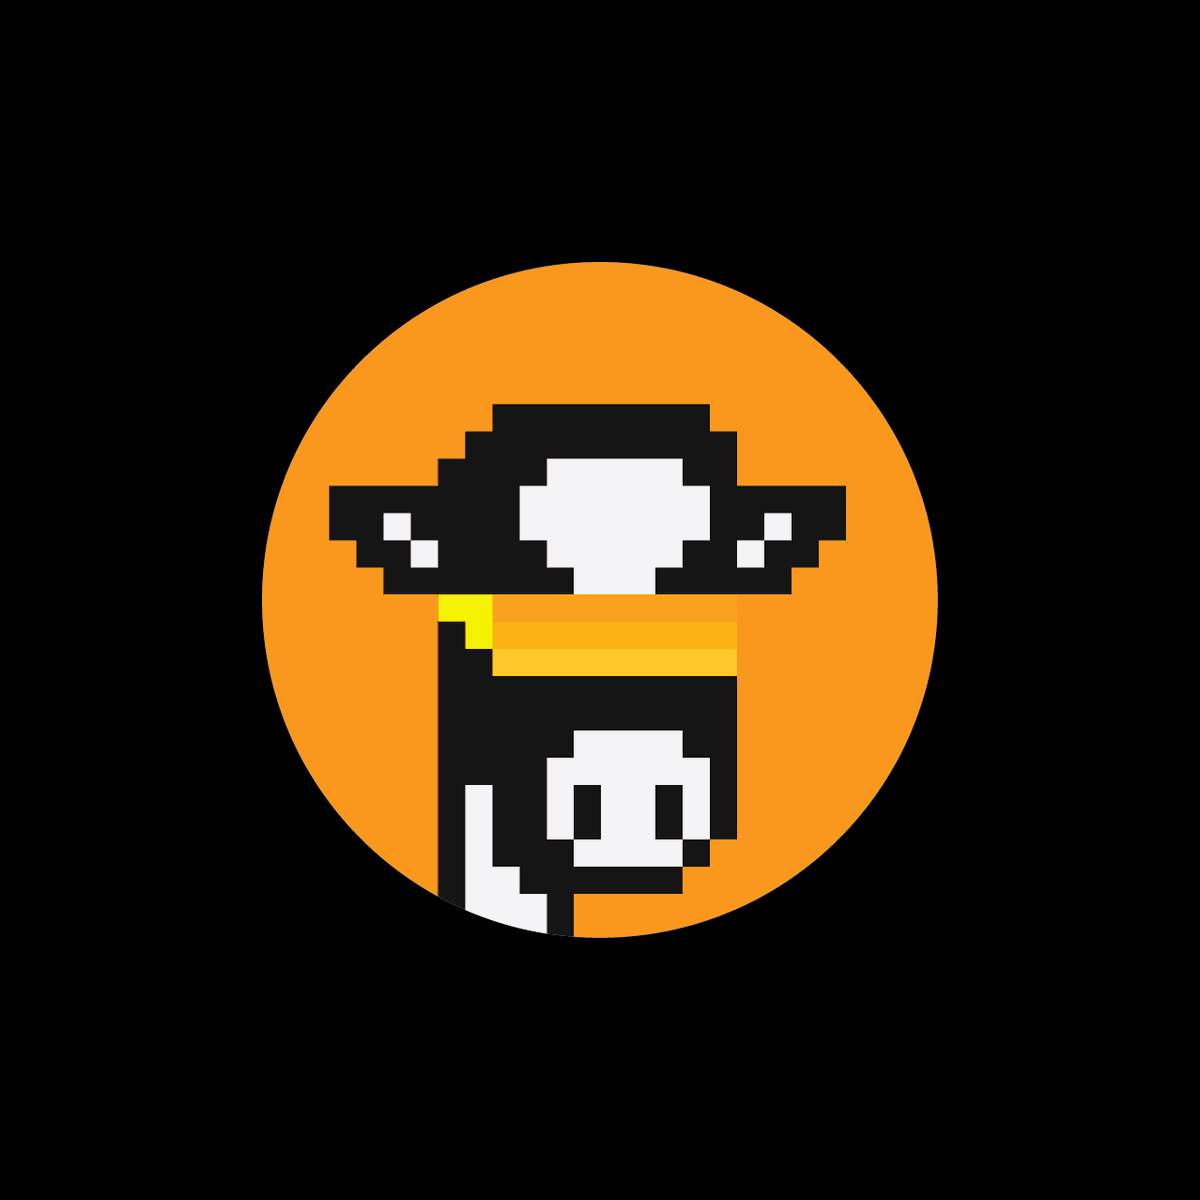 gOOd mOOrning! 🐮🟠

we are excited to announce a WL giveaway on Discord for the third phase of our project,

Eligibility:
- holders who own both BASE and SOL CowPunks
(must hold at least 1 CowPunks on each chain to register)

Discord & Secondary in Bio!

Details & Register :